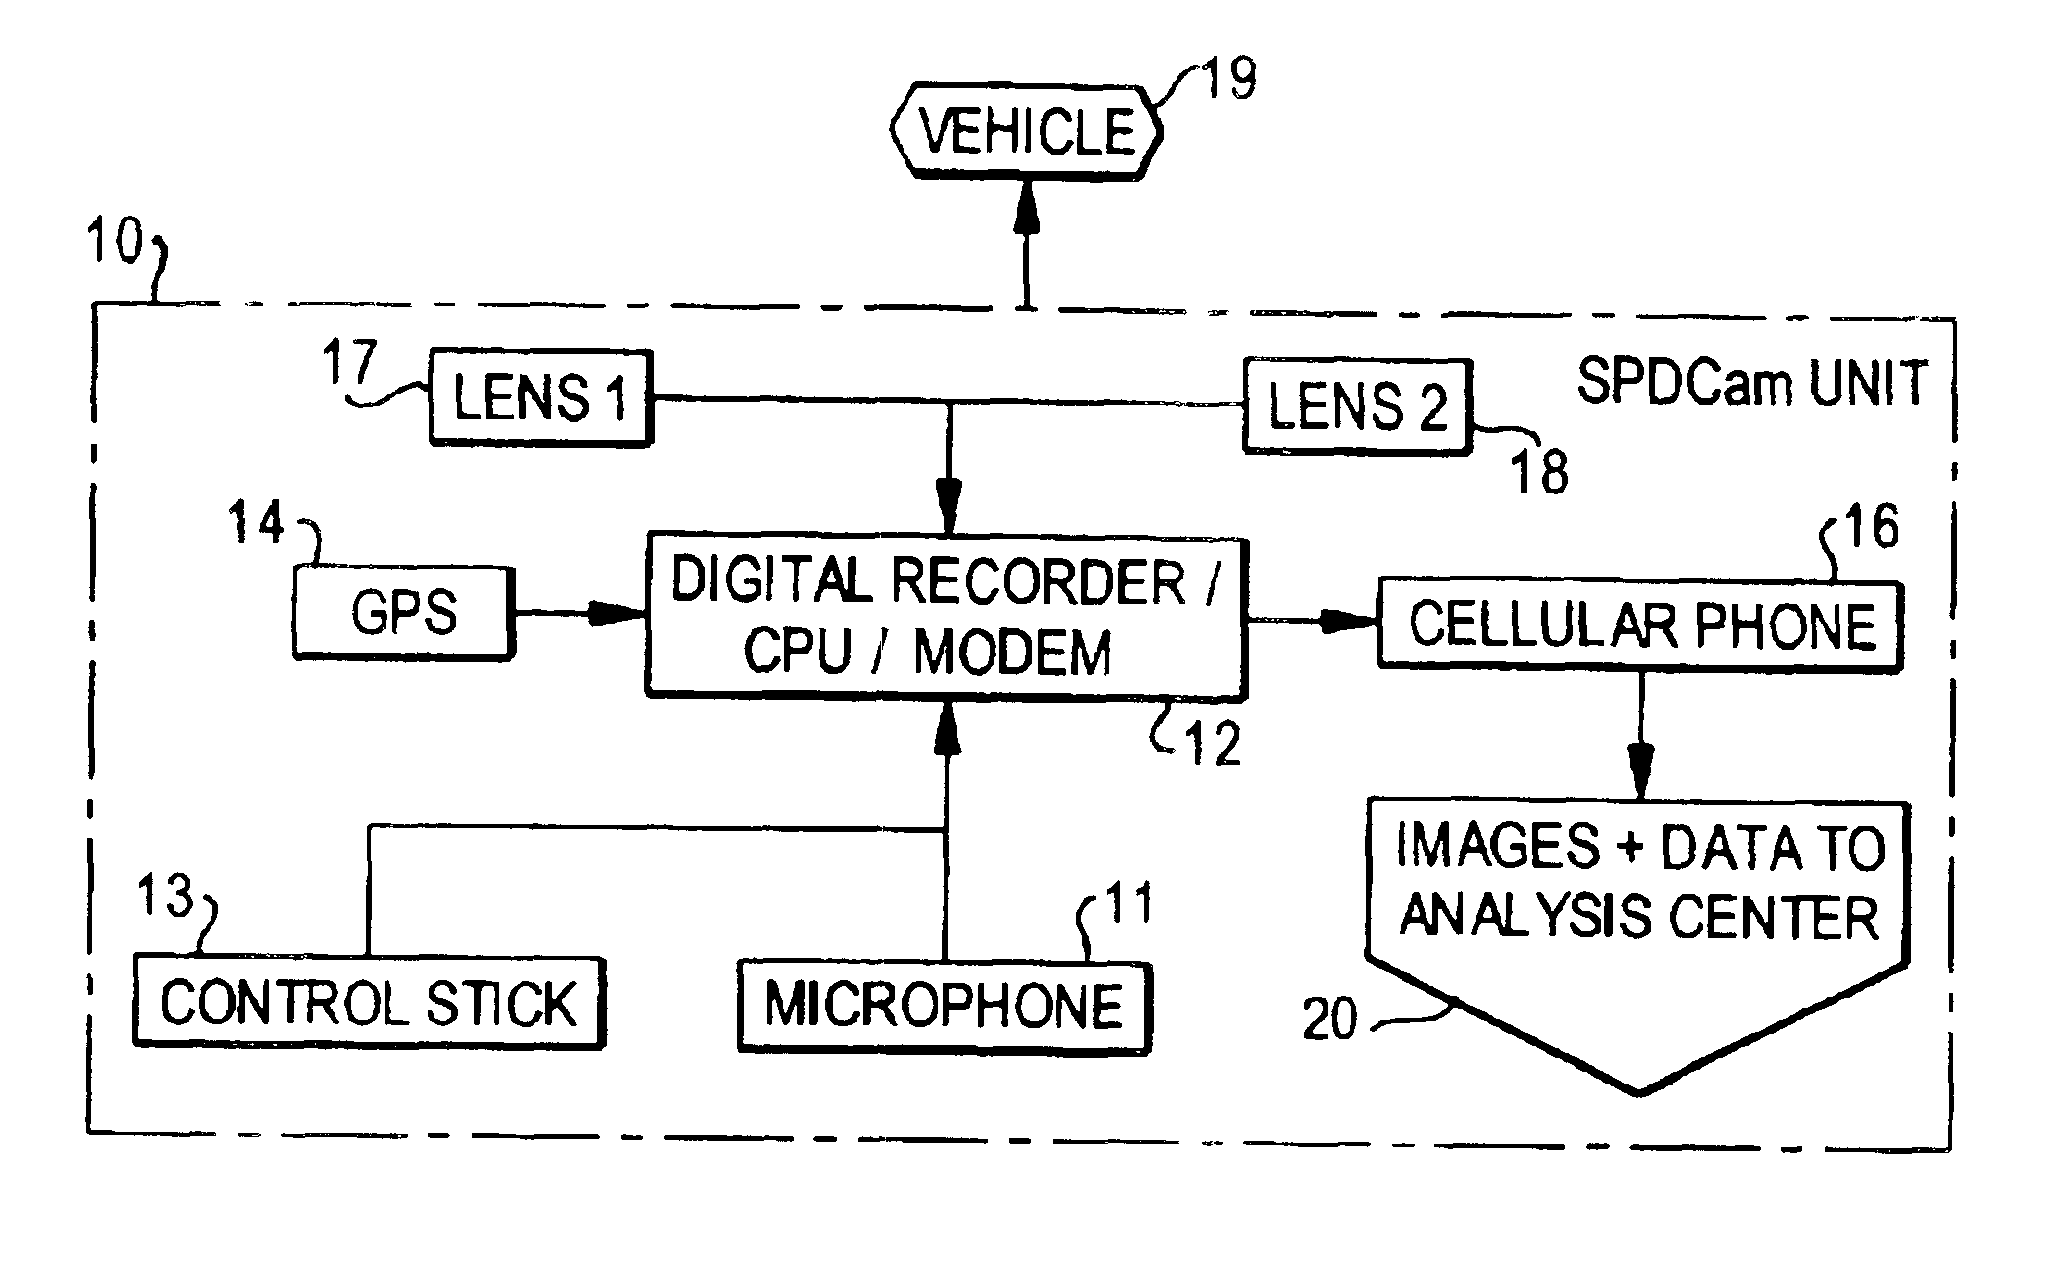 System and method for detecting and identifying traffic law violators and issuing citations